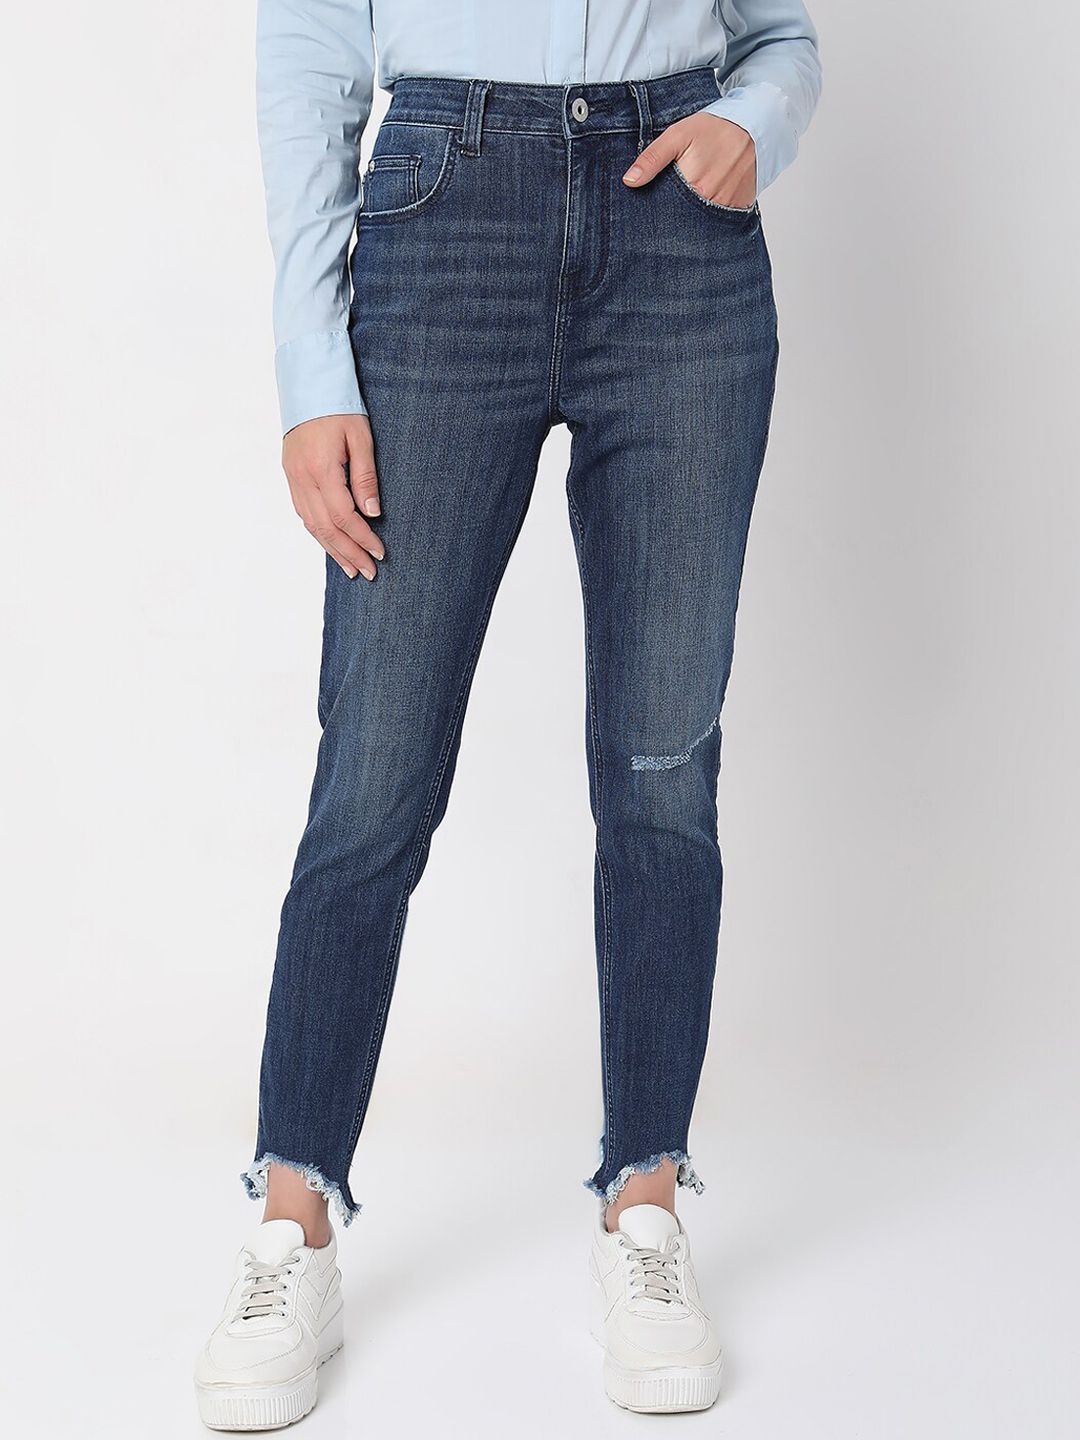 Vero Moda Women Blue Highly Distressed Jeans Price in India